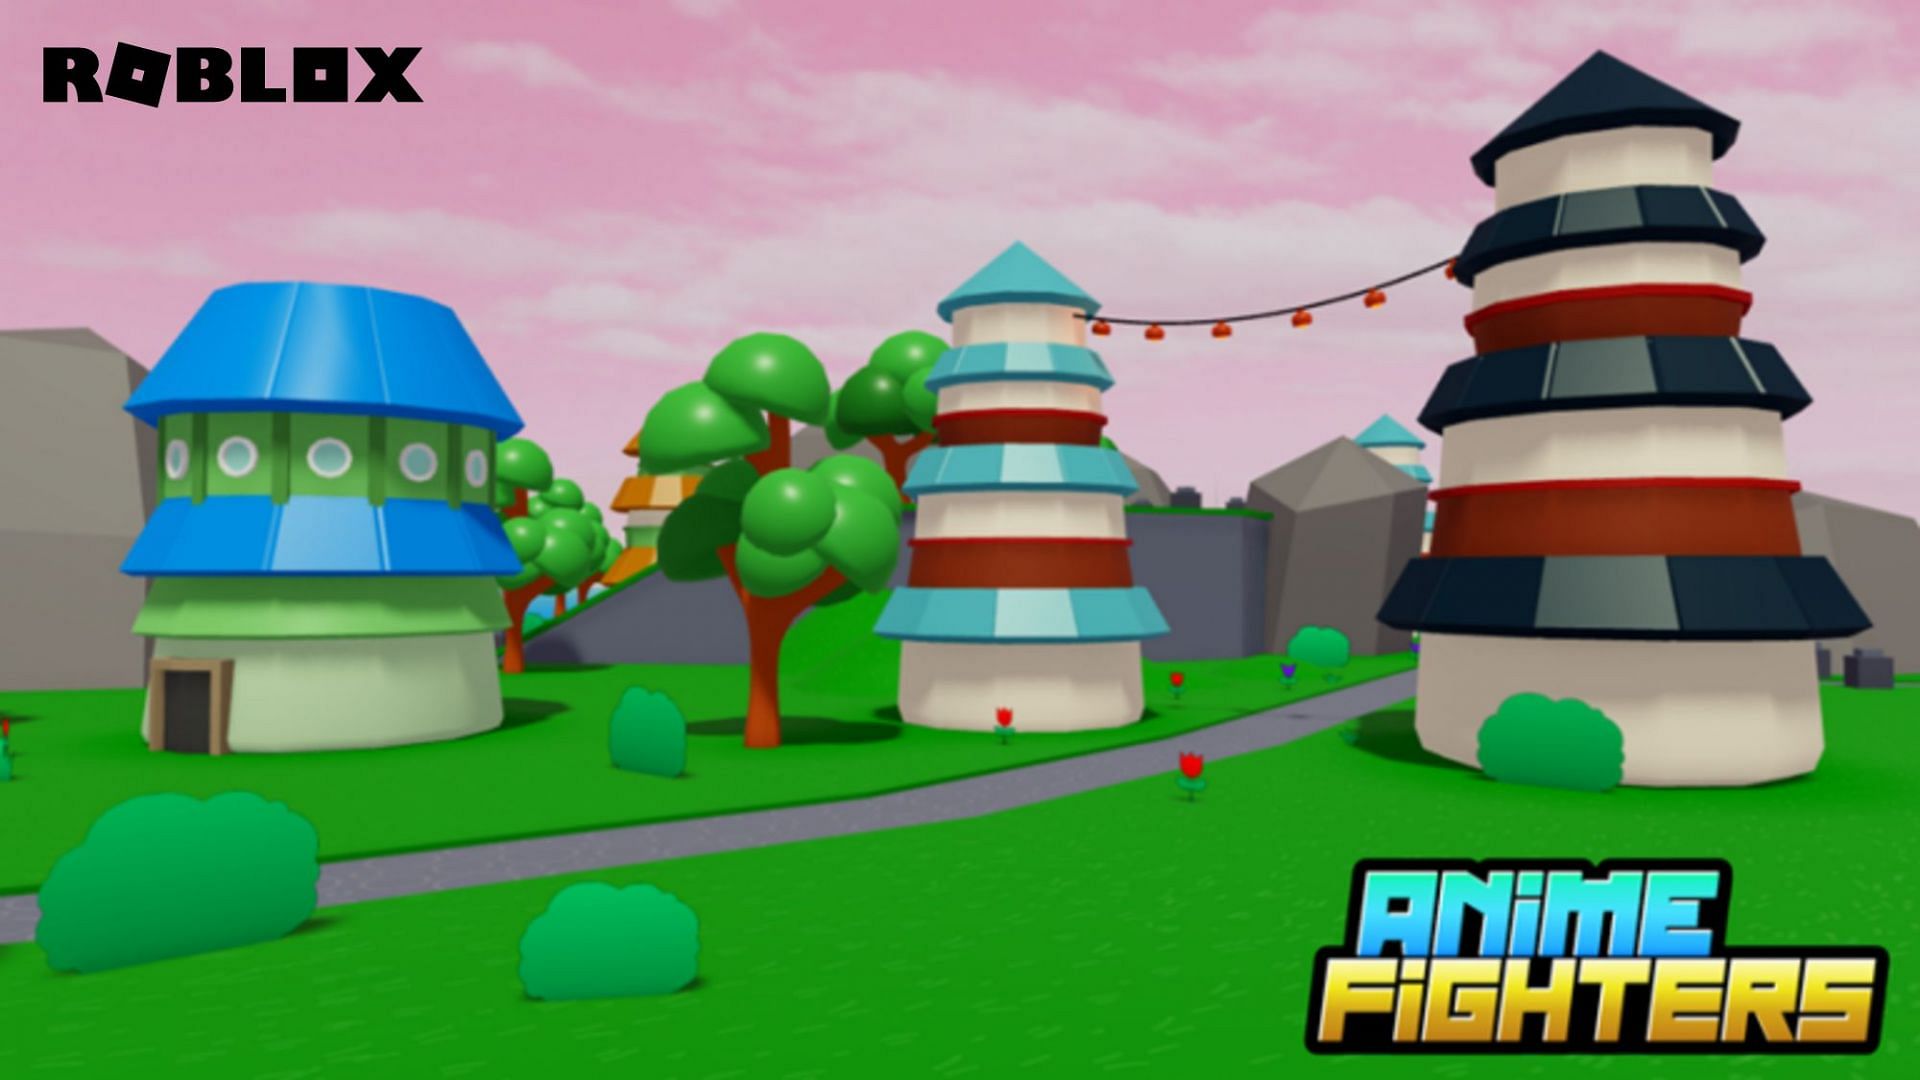 Collect and train the strongest fighters in Roblox Anime Fighters Simulator (Image via Roblox)